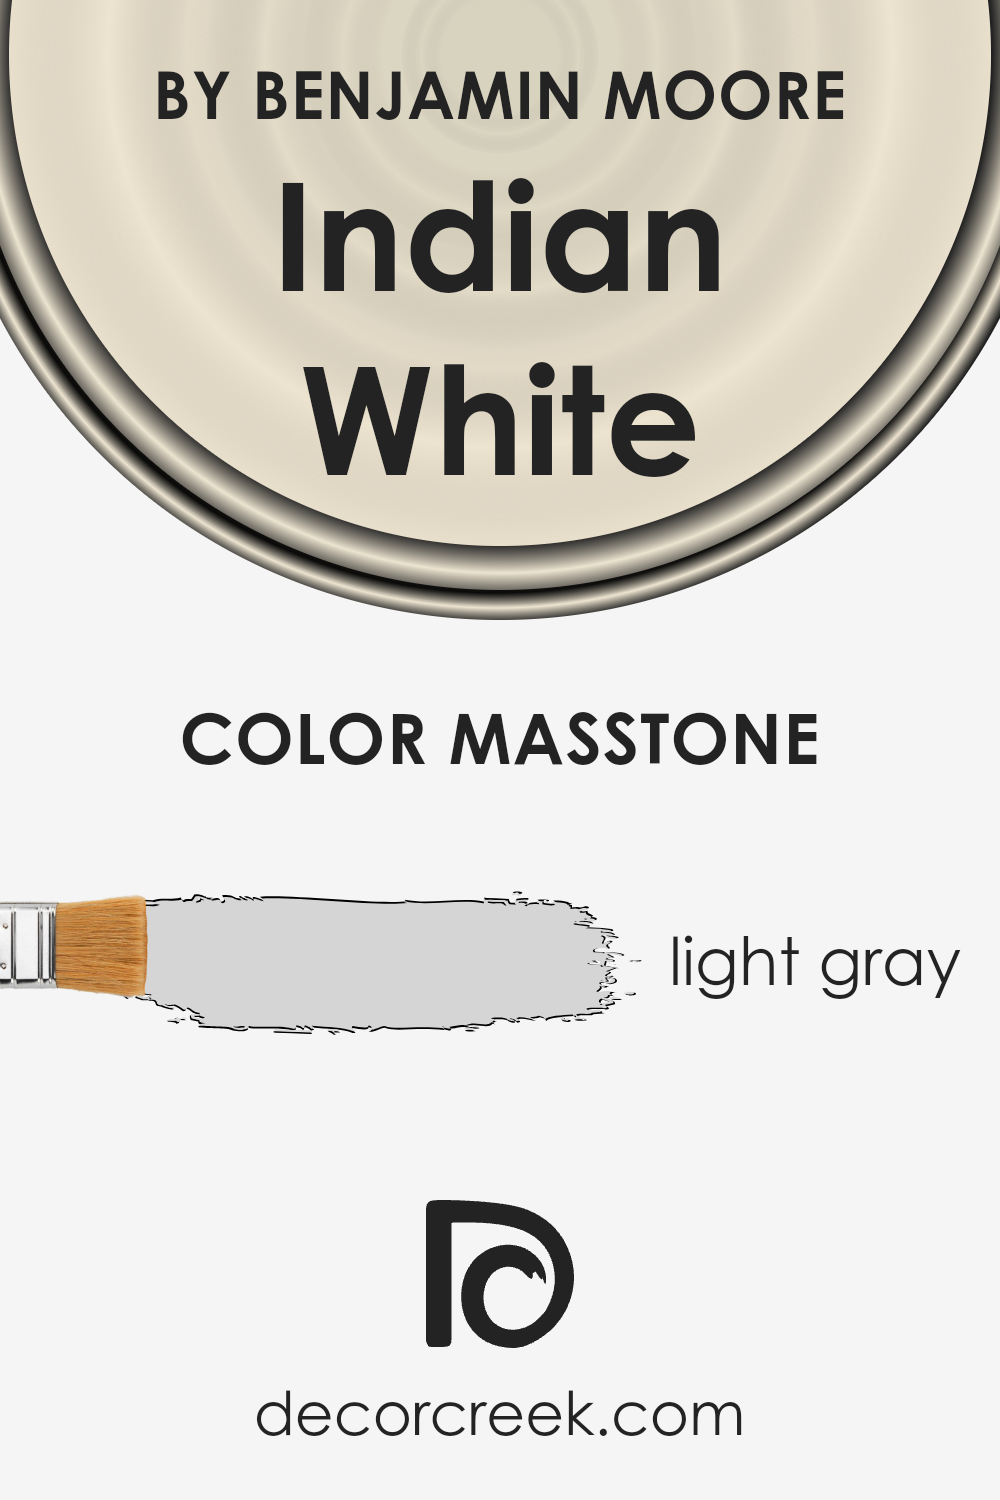 what_is_the_masstone_of_indian_white_oc_88